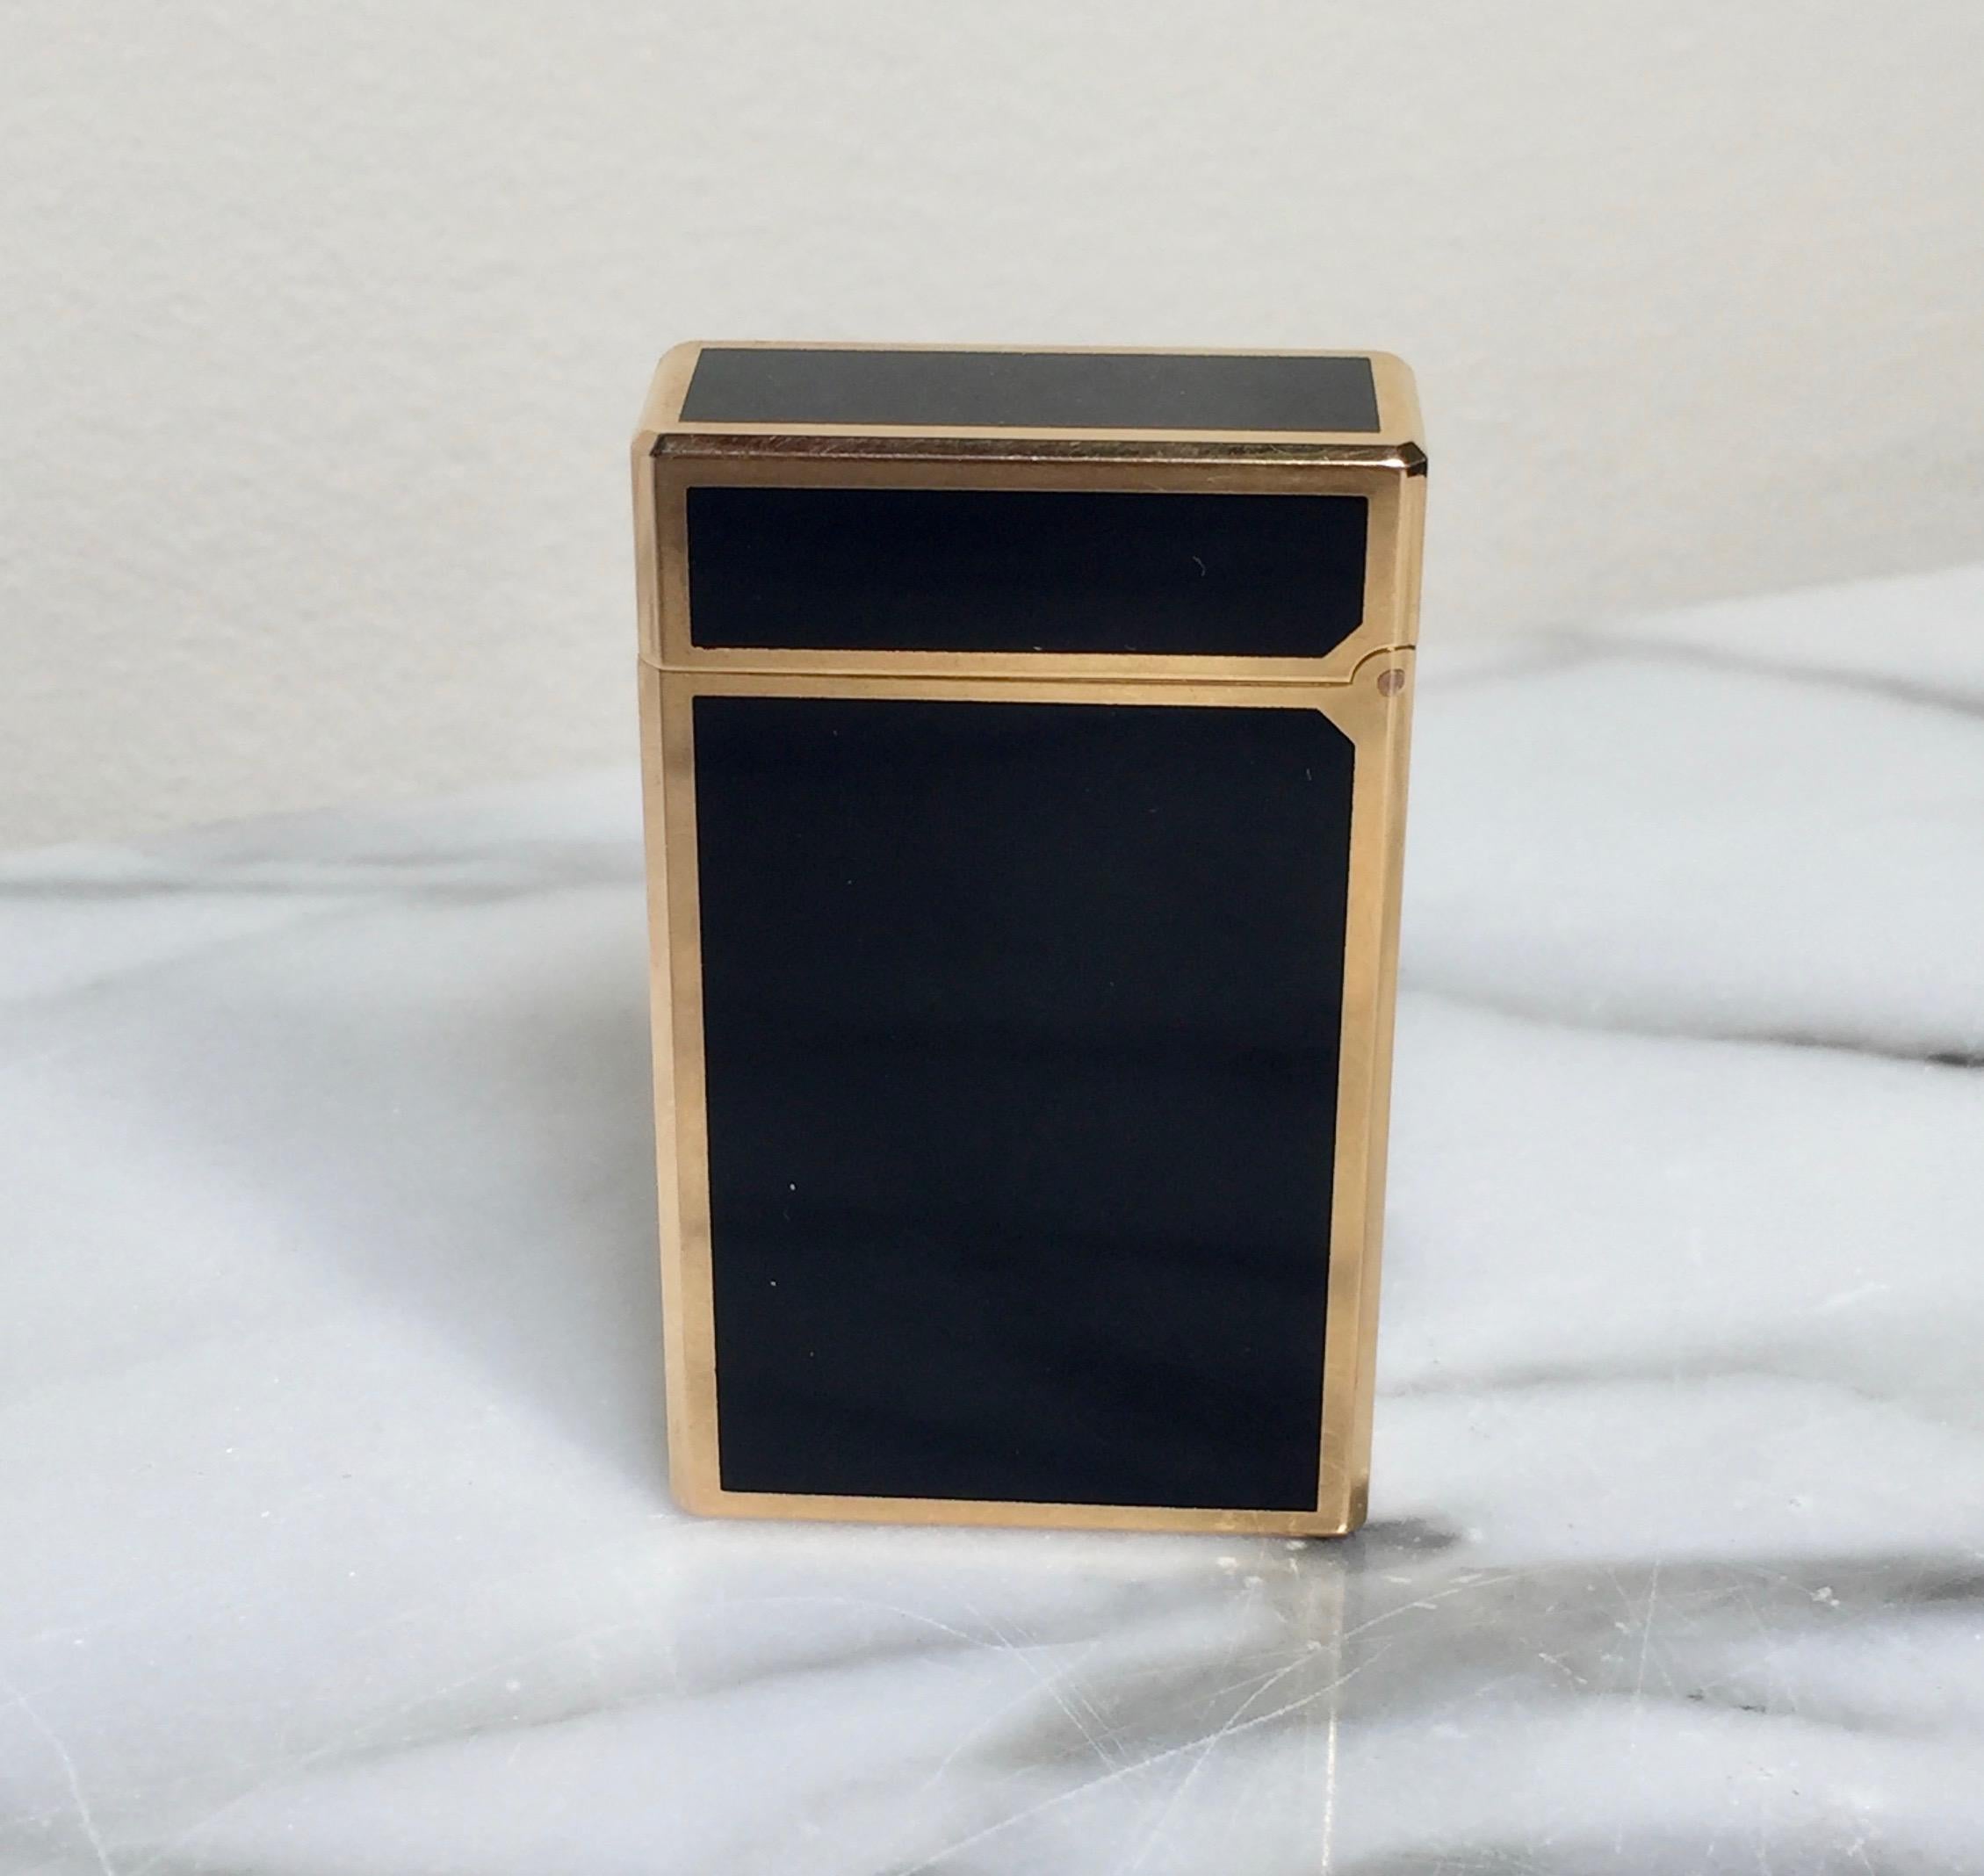 French S.T. Dupont Black Lacquer with Gold-Plated Trim Windsor Design Lighter